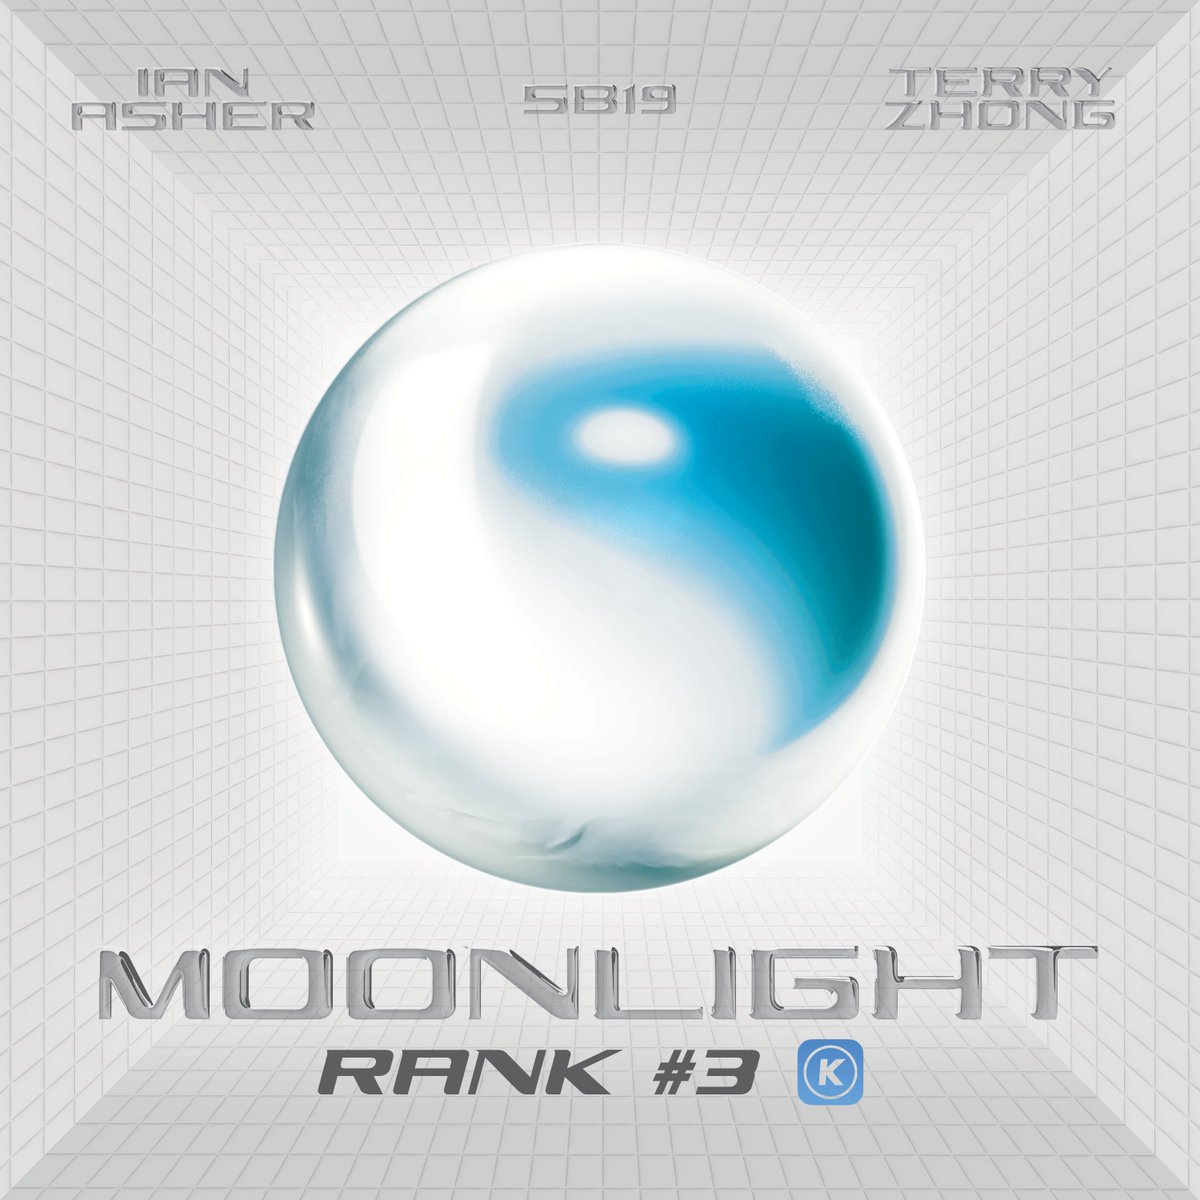 ⚪️ MOONLIGHT REACHES #3 ON KUGOU & #31 ON MASSIVE 40 UK CHARTS Moonlight' ascends to an impressive 3rd place on Kugou, China's premier streaming platform, and is also making waves in Europe entering the Massive 40 UK Charts. Stream 'MOONLIGHT' here: 🎧 orcd.co/inthemoonlight…